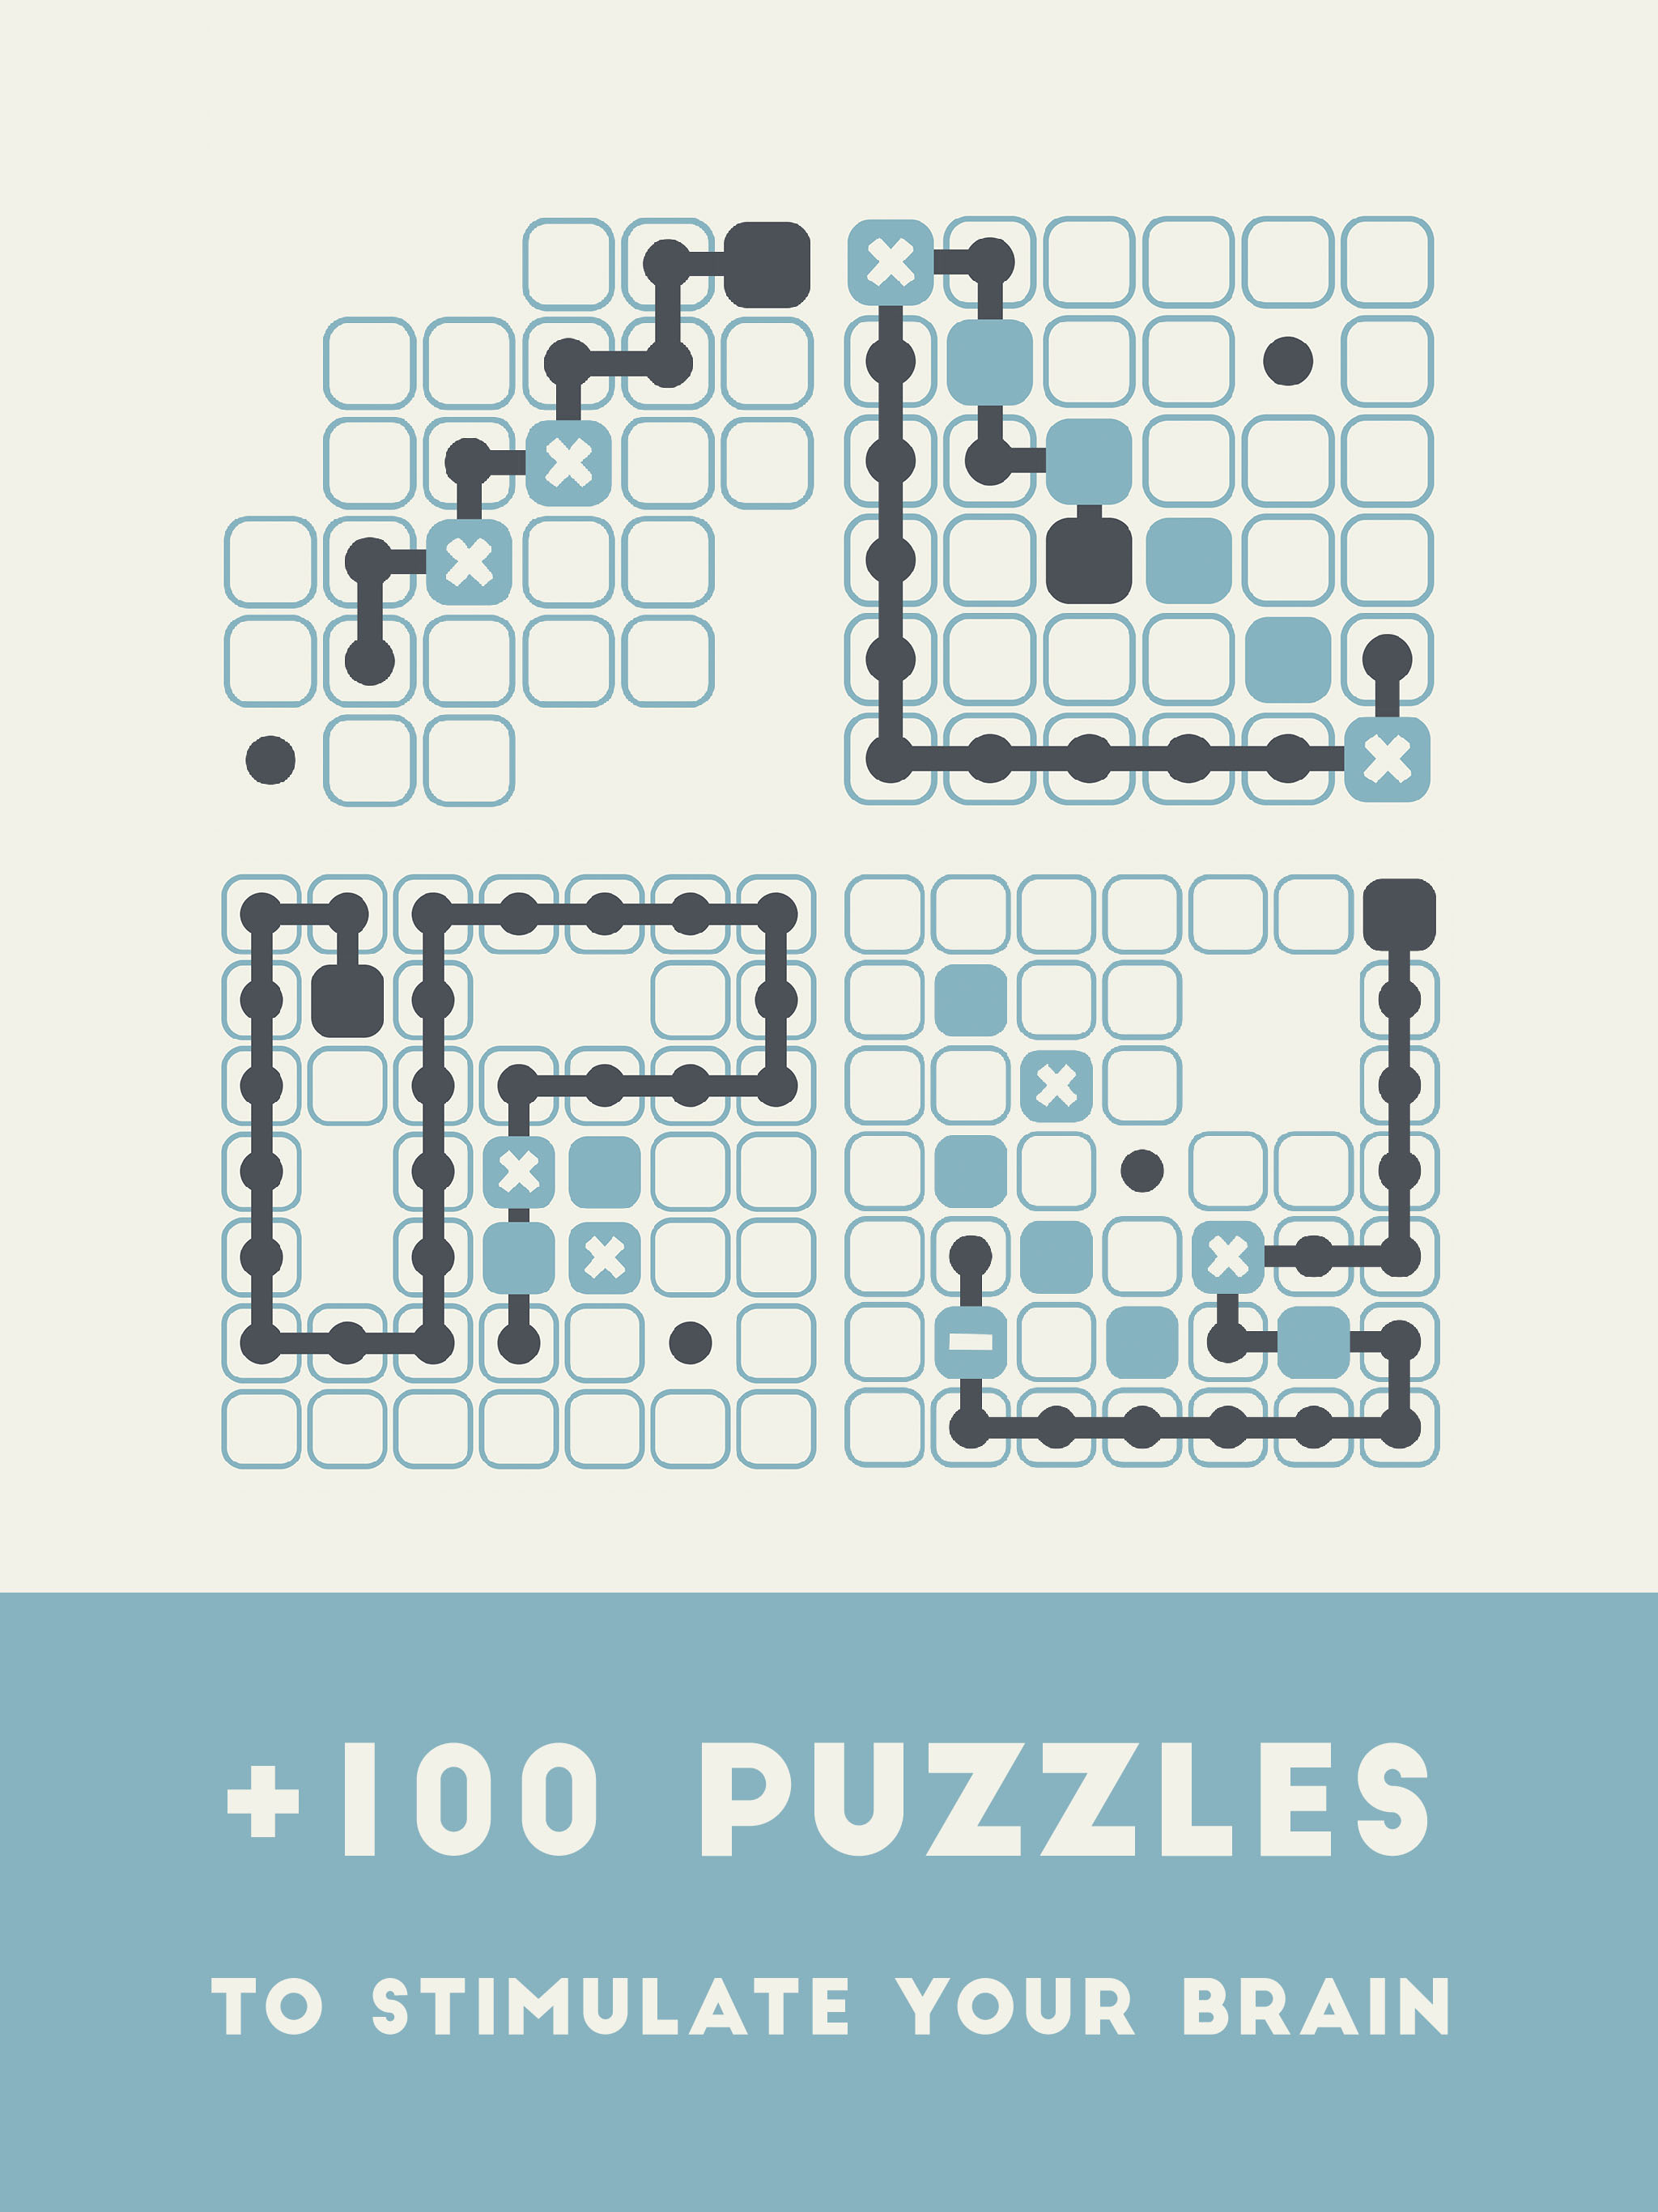 +100 puzzles to stimulate your brain